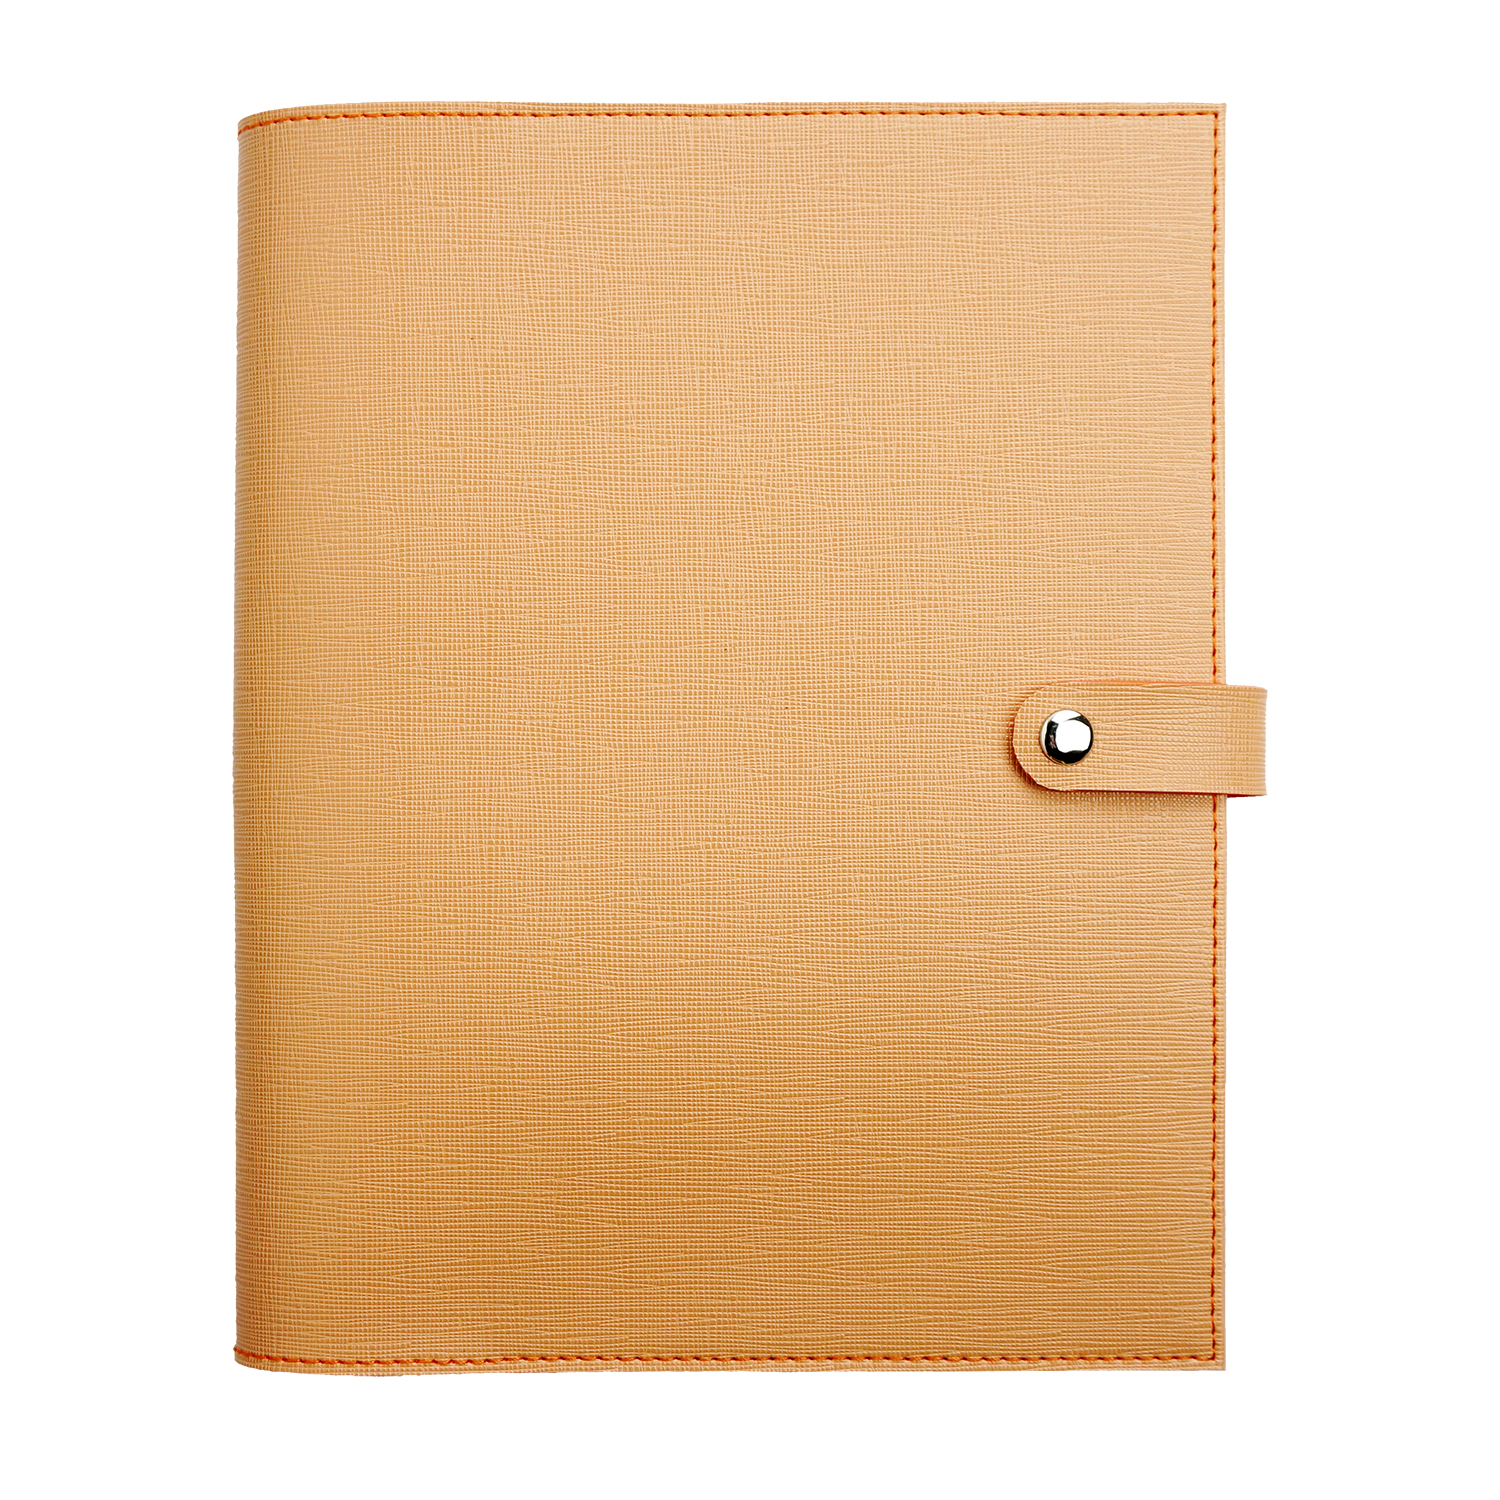 FD-1816 synthetic leather padfolio Tan